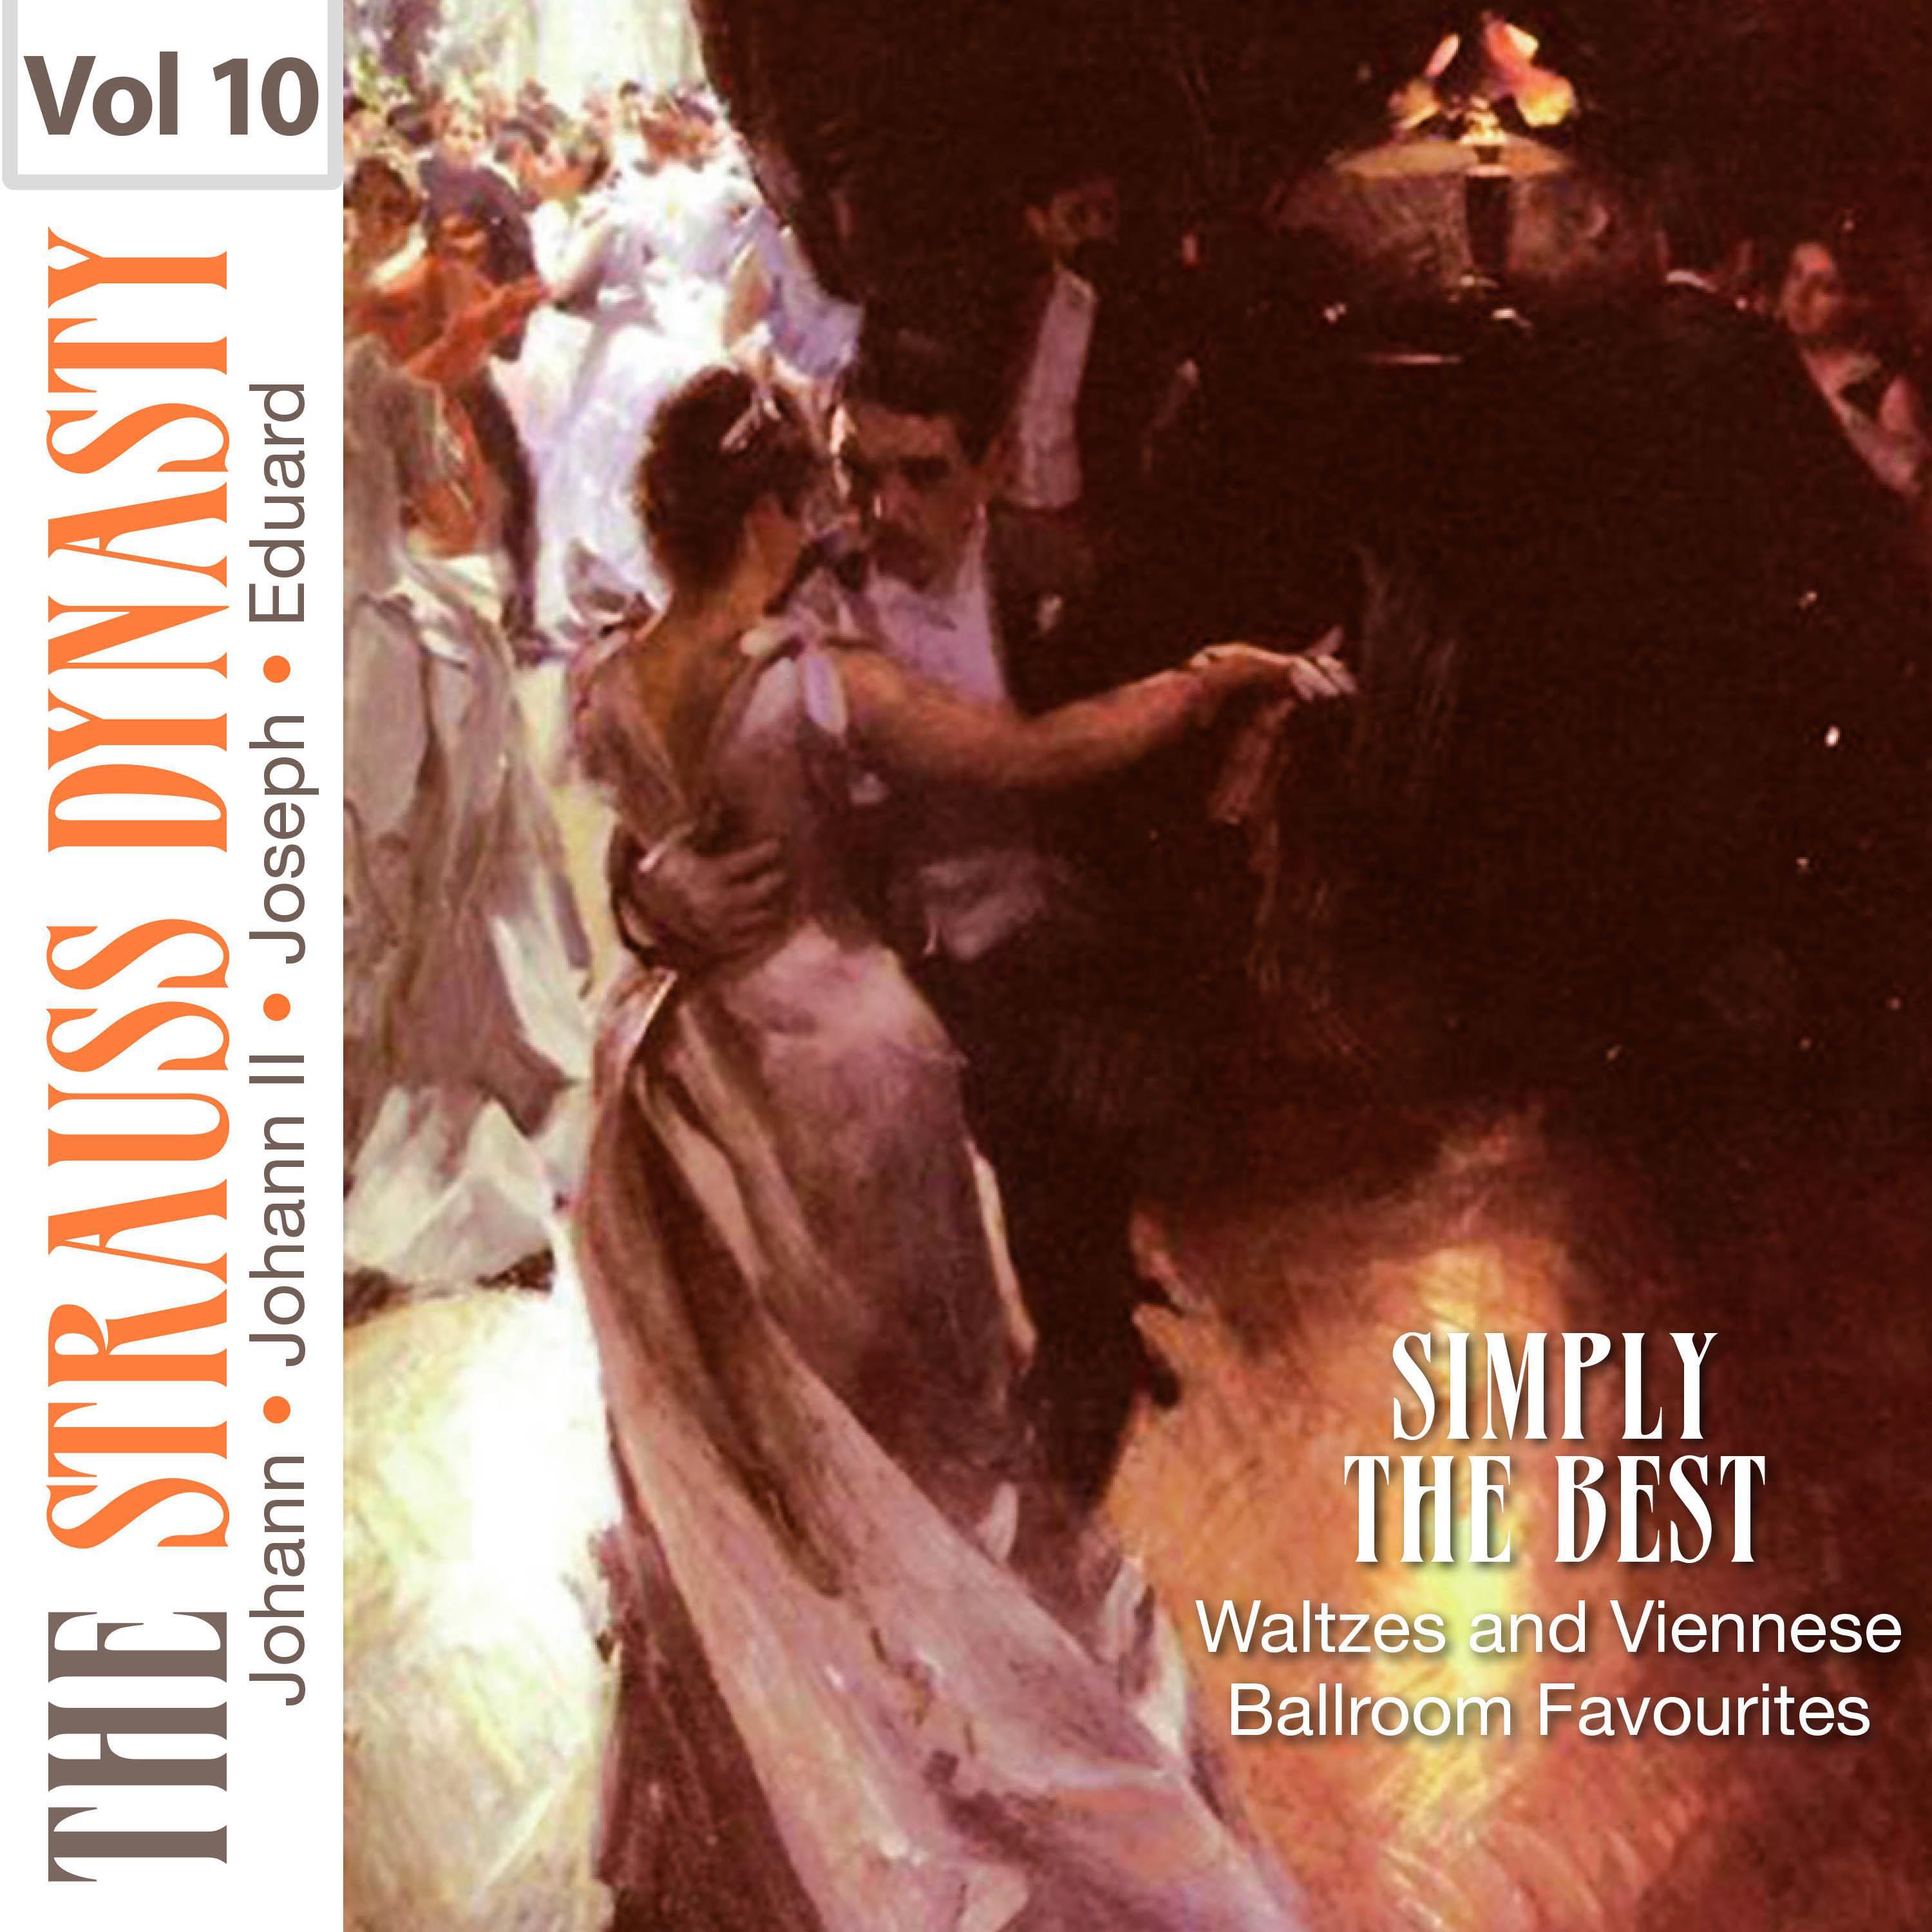 Simply the Best Waltzes and Viennese Ballroom Favourites, Vol. 10